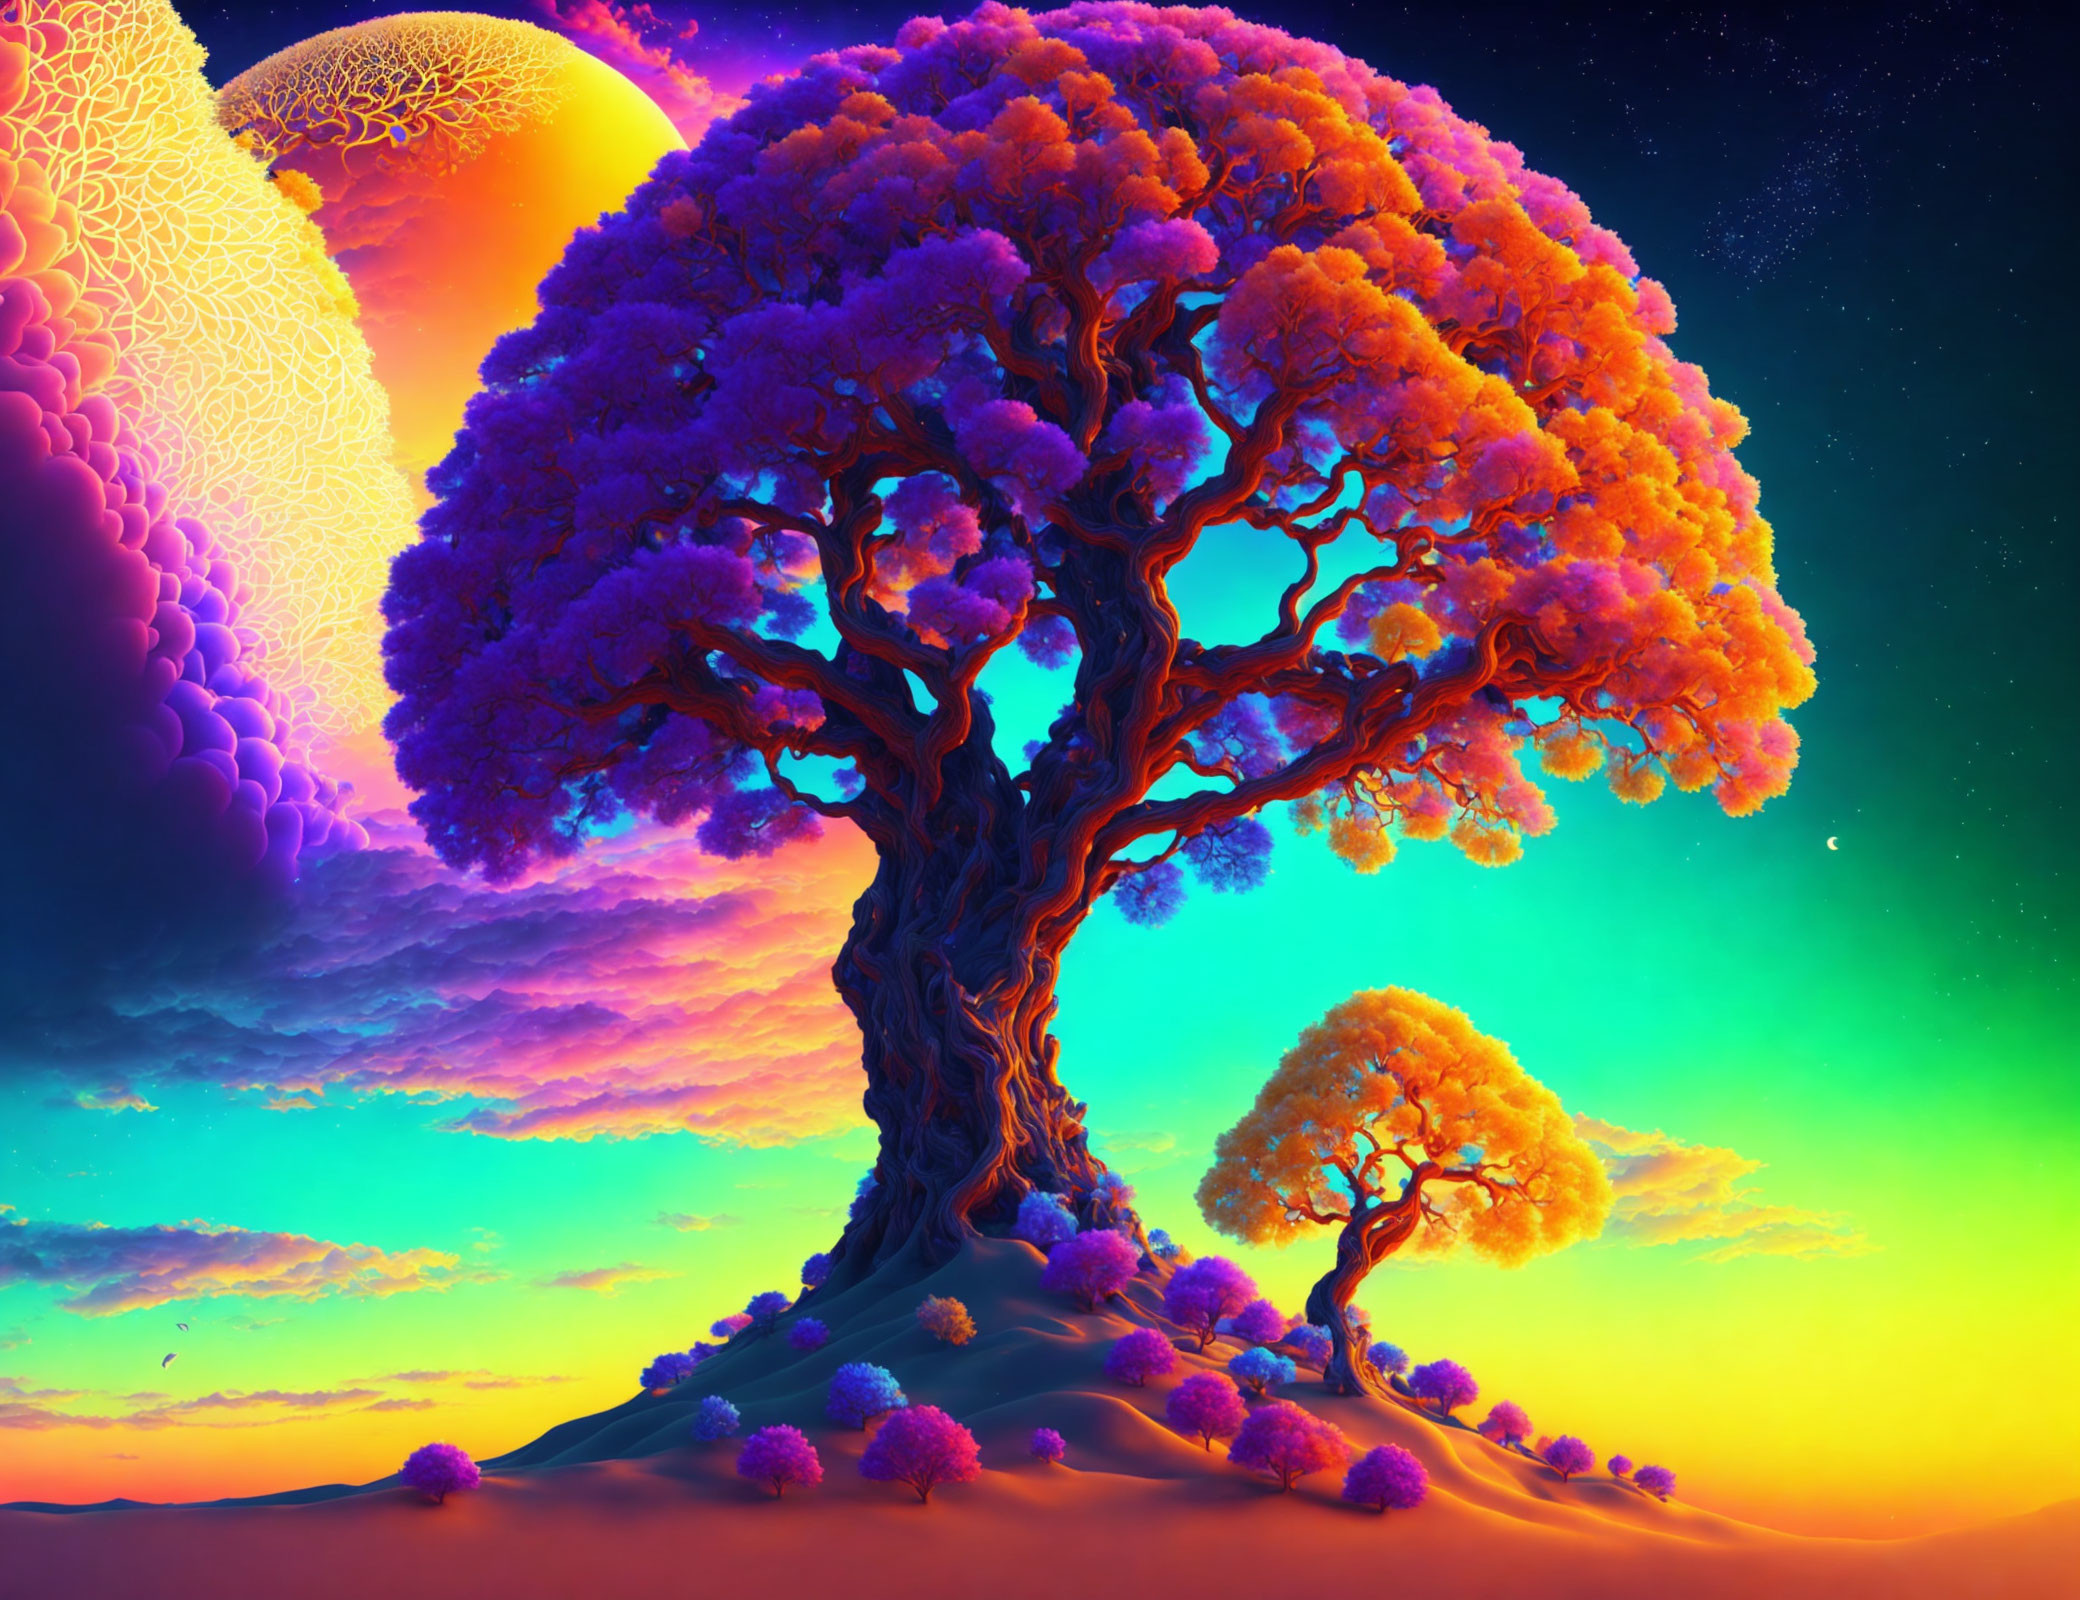 Colorful surreal landscape with luminous fiery tree under psychedelic sky